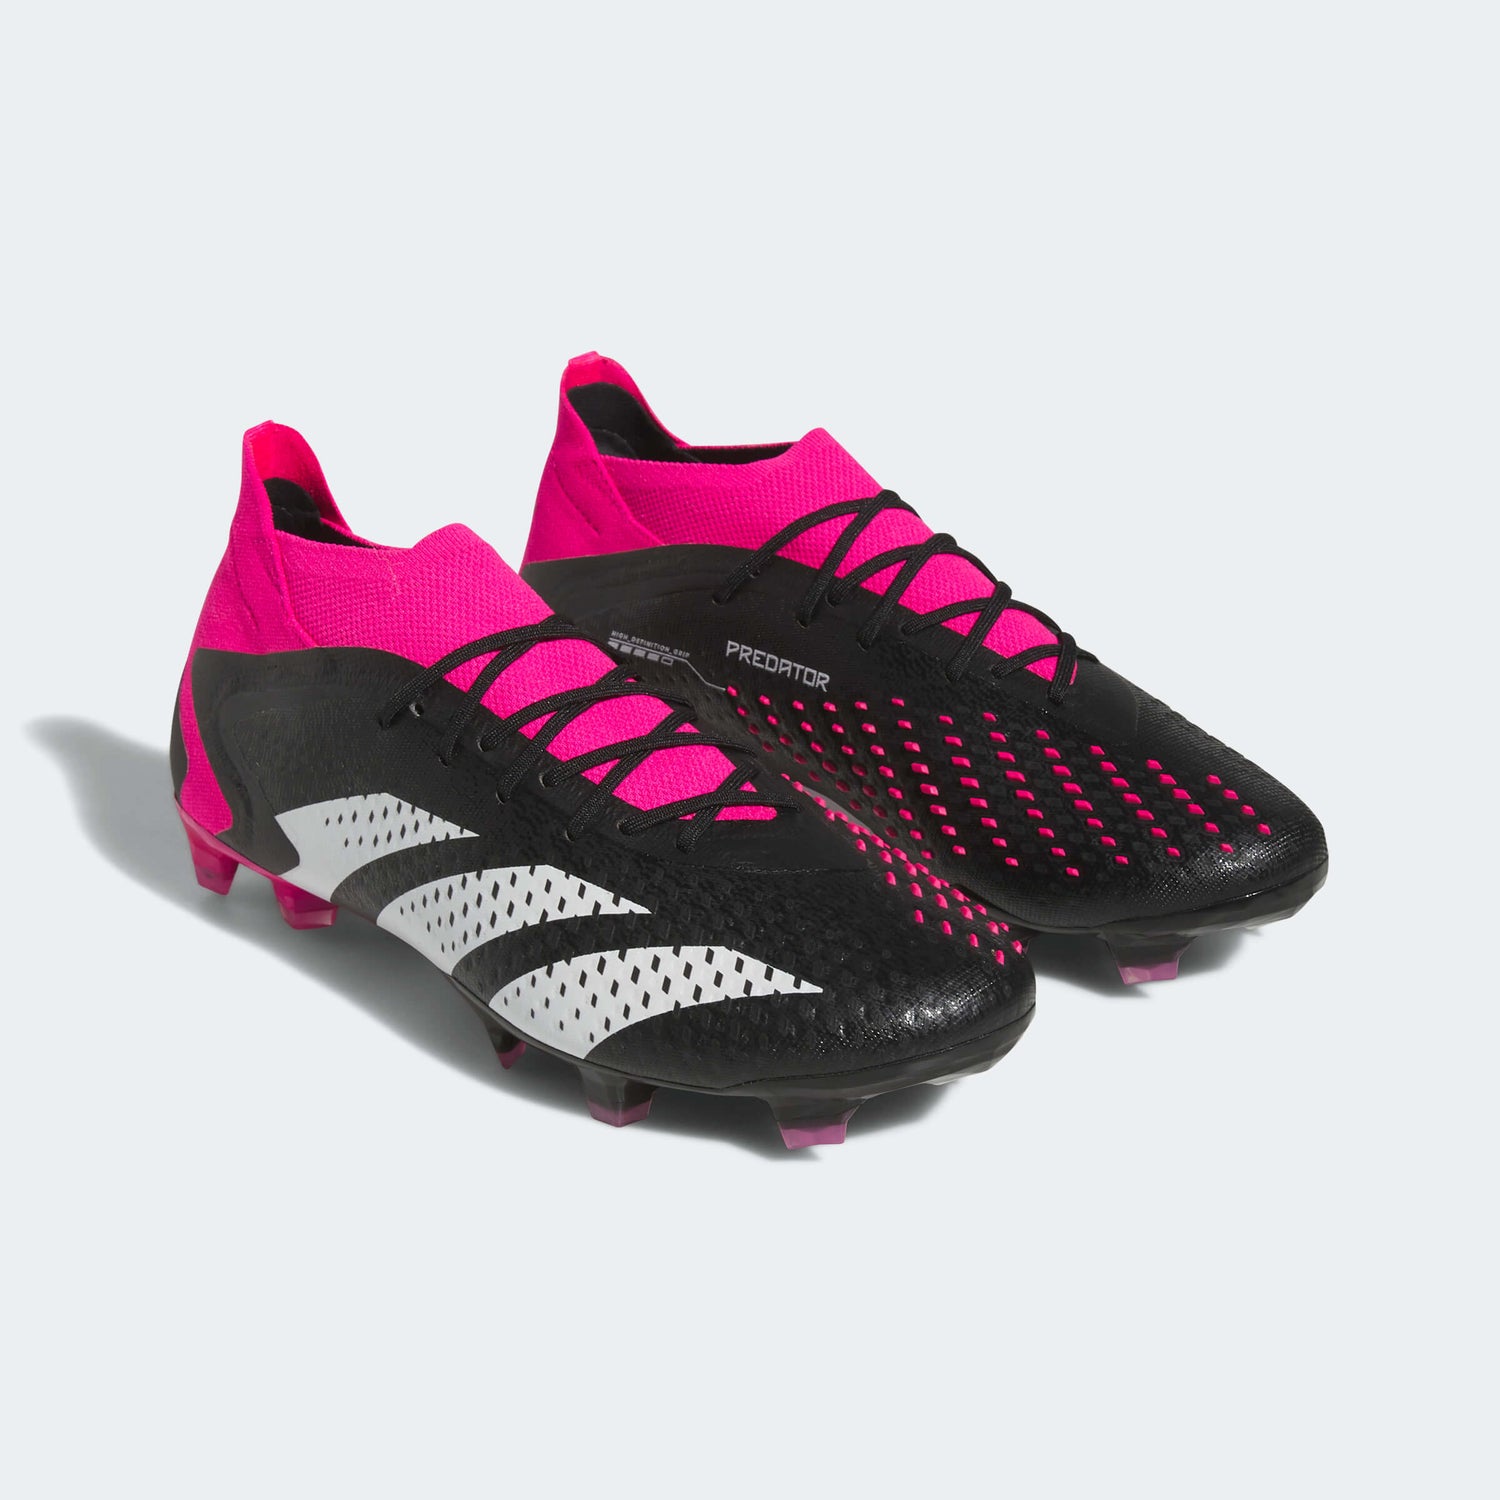 Adidas Predator Accuracy.1 FG - Own Your Football (SP23) (Pair - Front Lateral)